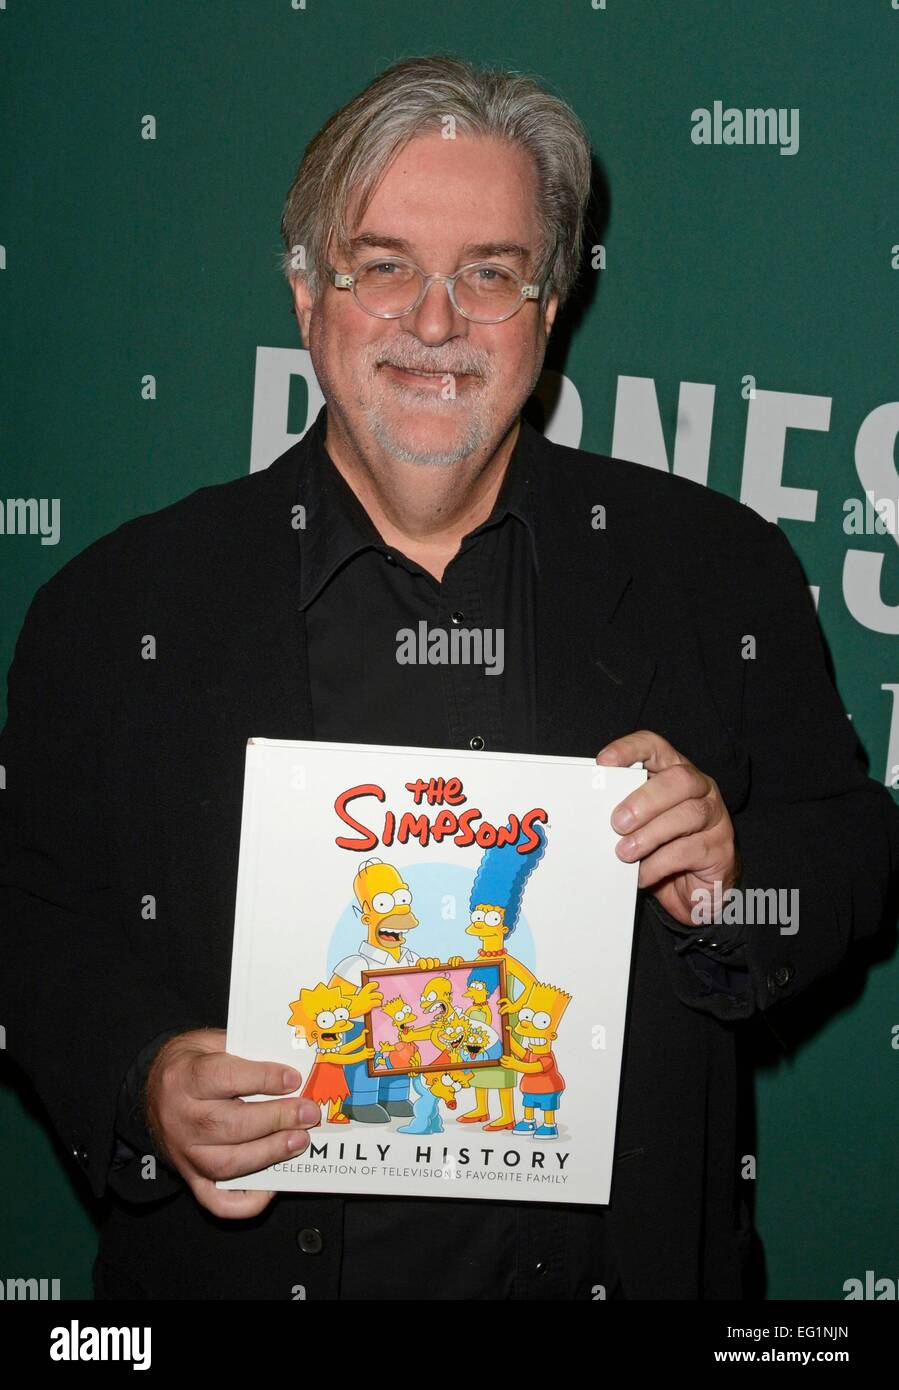 New York, NY, USA. 13th Feb, 2015. Matt Groening at in-store appearance for Matt Groening Book Signing for THE SIMPSONS FAMILY HISTORY, Barnes and Noble Book Store on Union Square, New York, NY February 13, 2015. © Derek Storm/Everett Collection/Alamy Live News Stock Photo